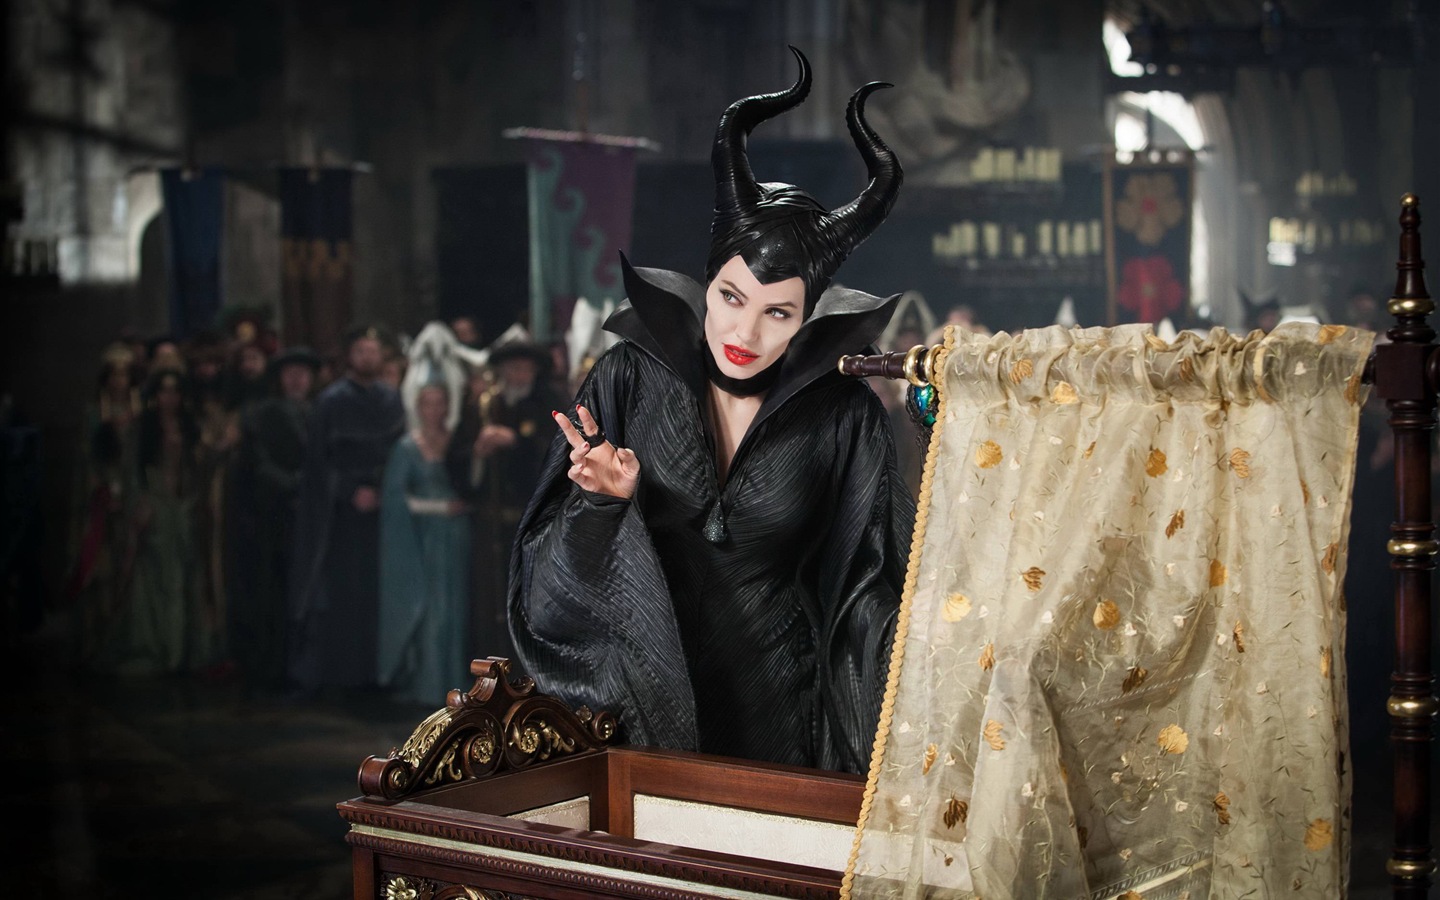 Maleficent 2014 HD movie wallpapers #5 - 1440x900